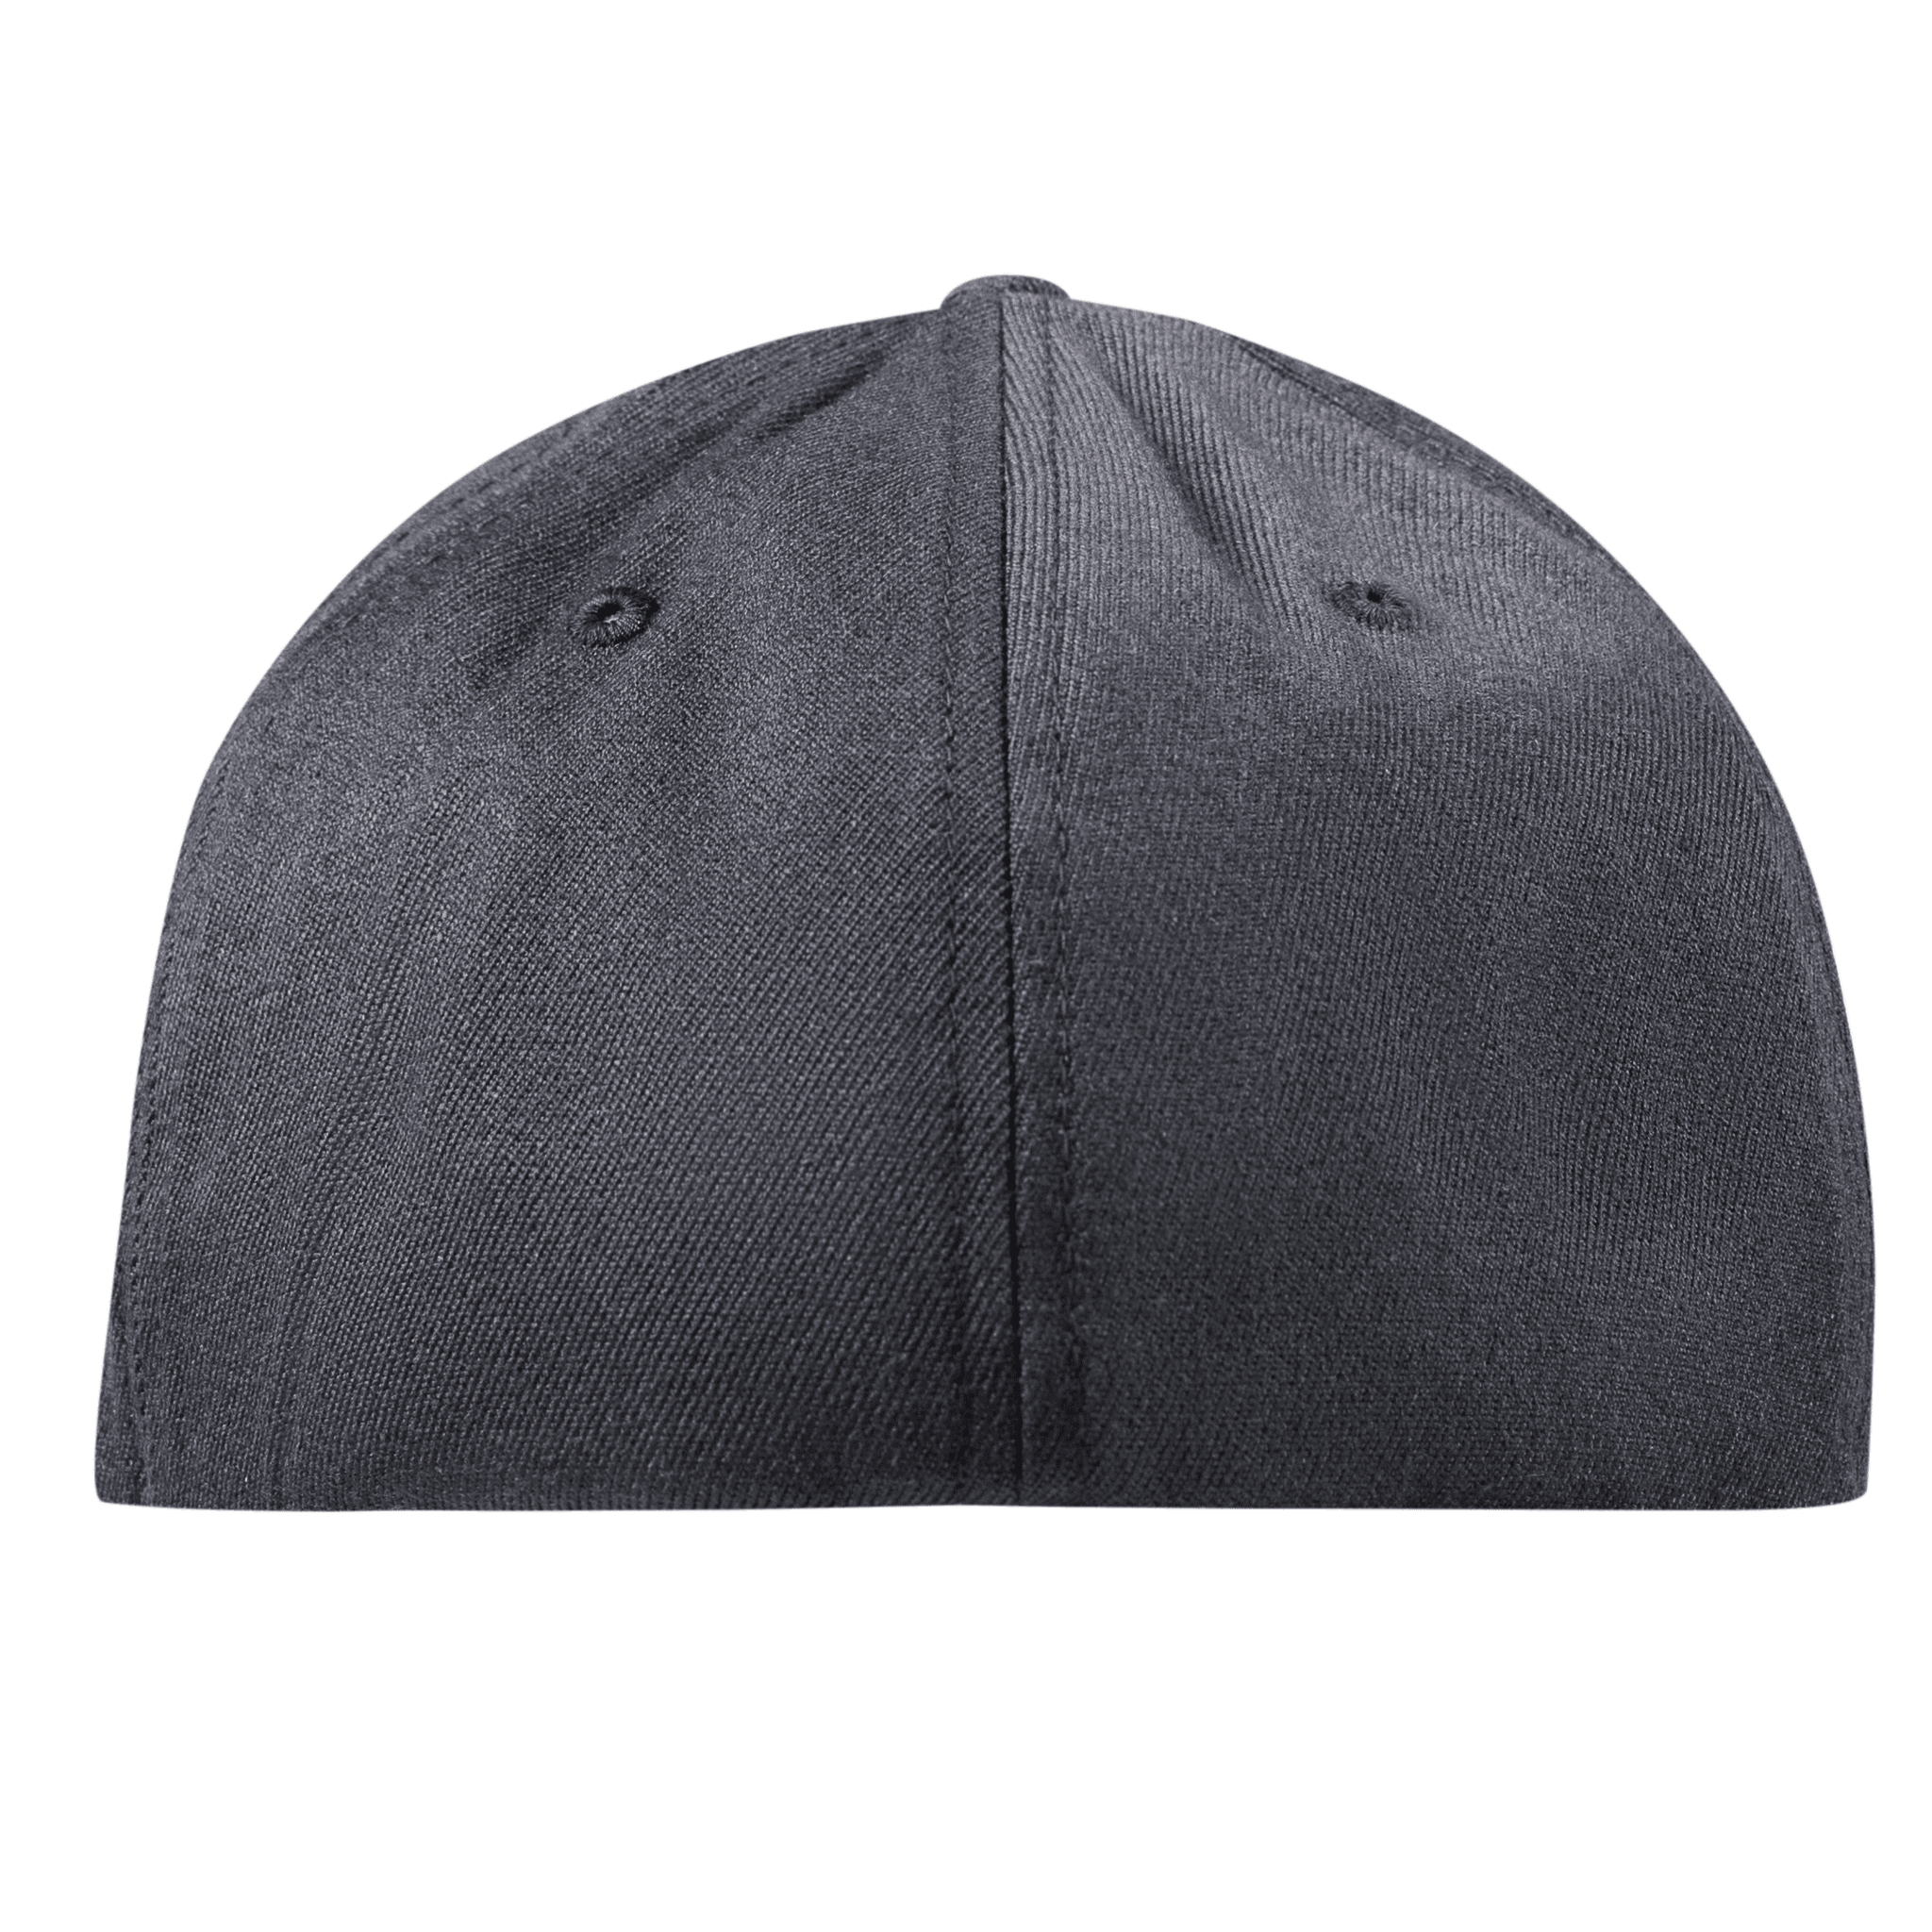 Colorado 38 PVC Flexfit Fitted Back Charcoal